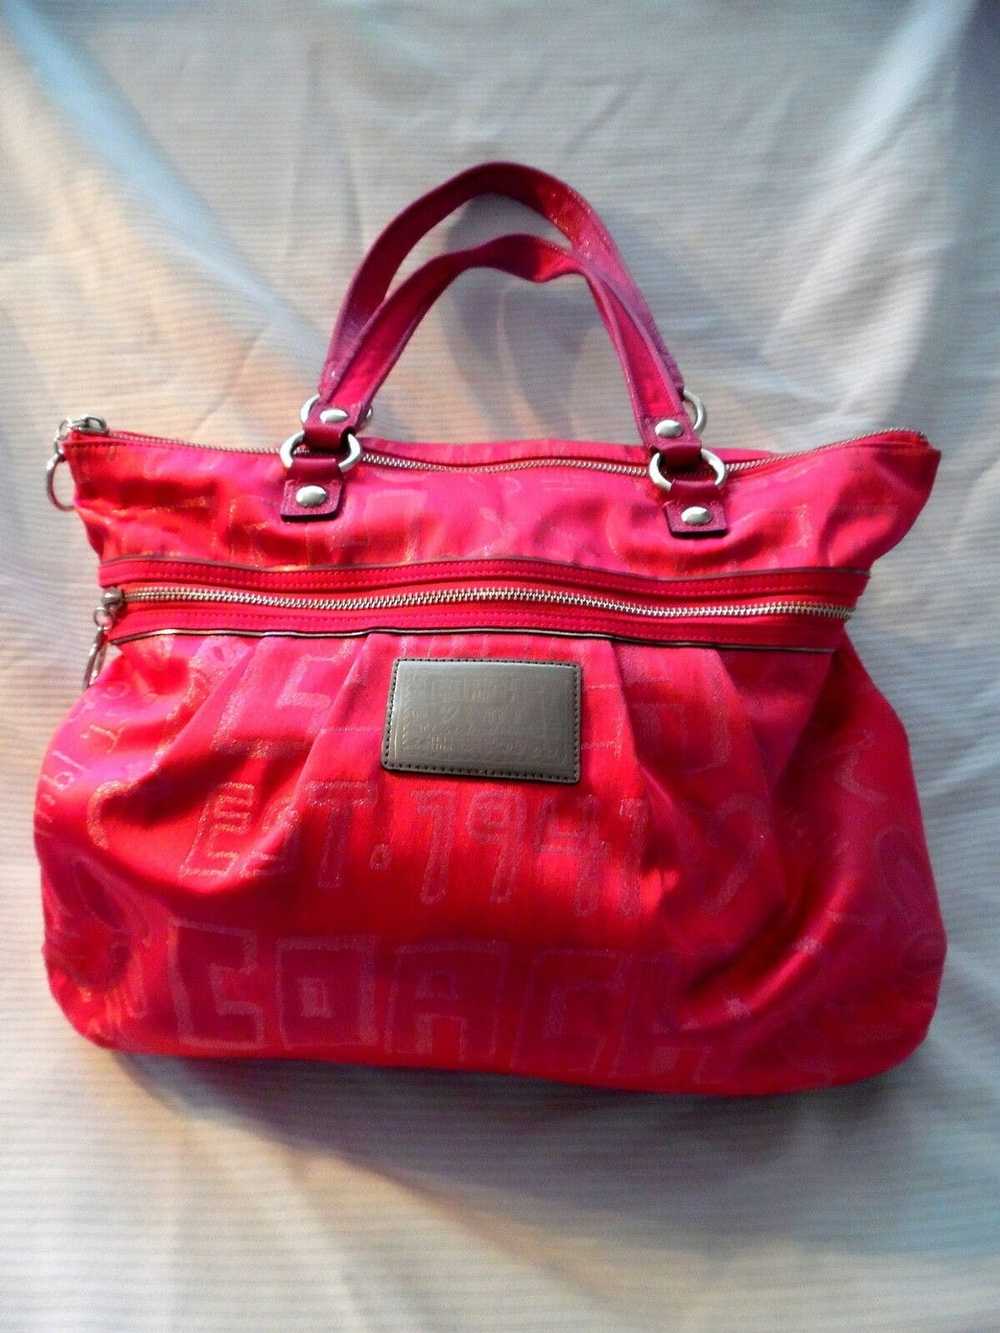 Coach Coach Poppy Storypatch Pink Glam Tote 15301 - image 1